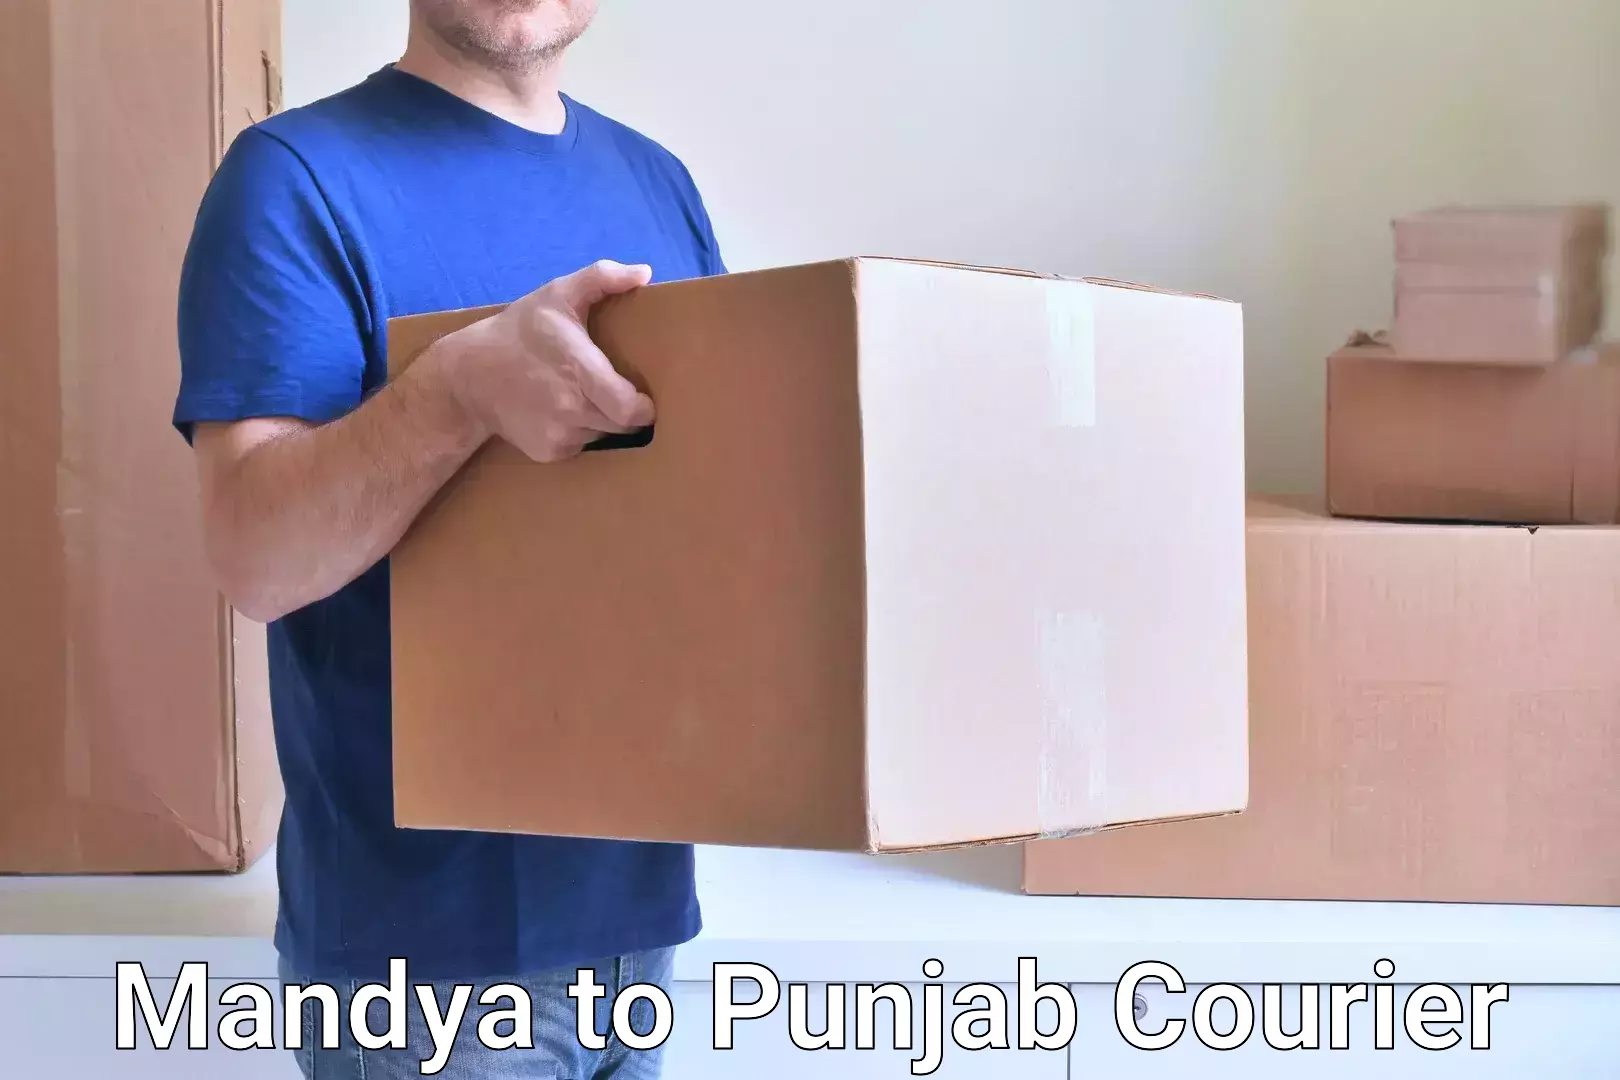 Supply chain delivery Mandya to Punjab